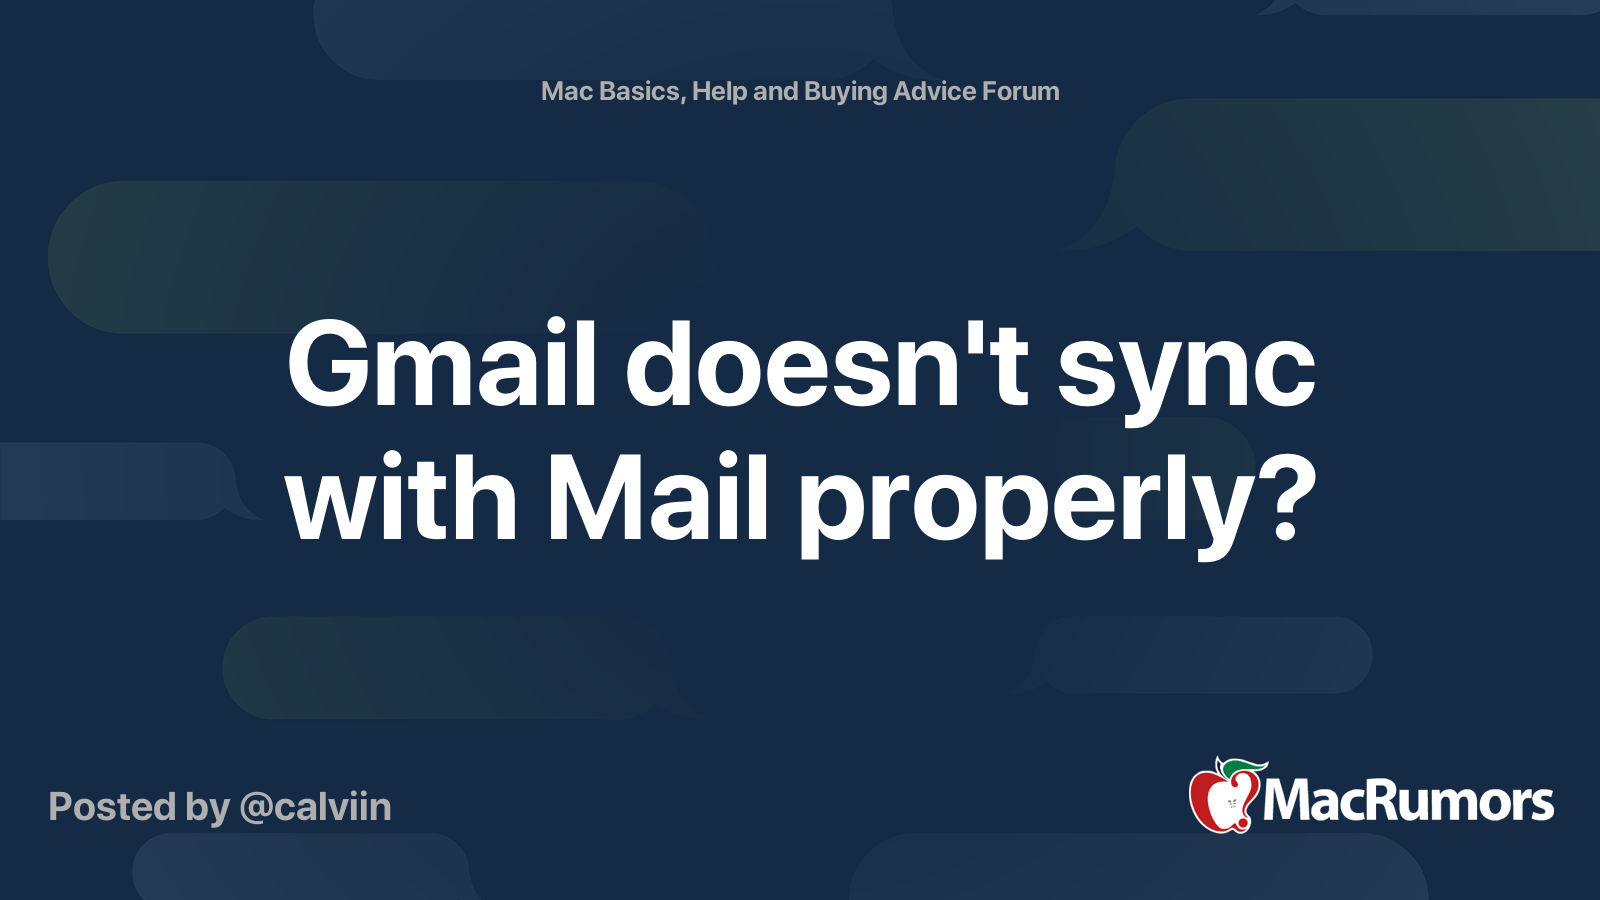 mailbird doesnt sync with gmail